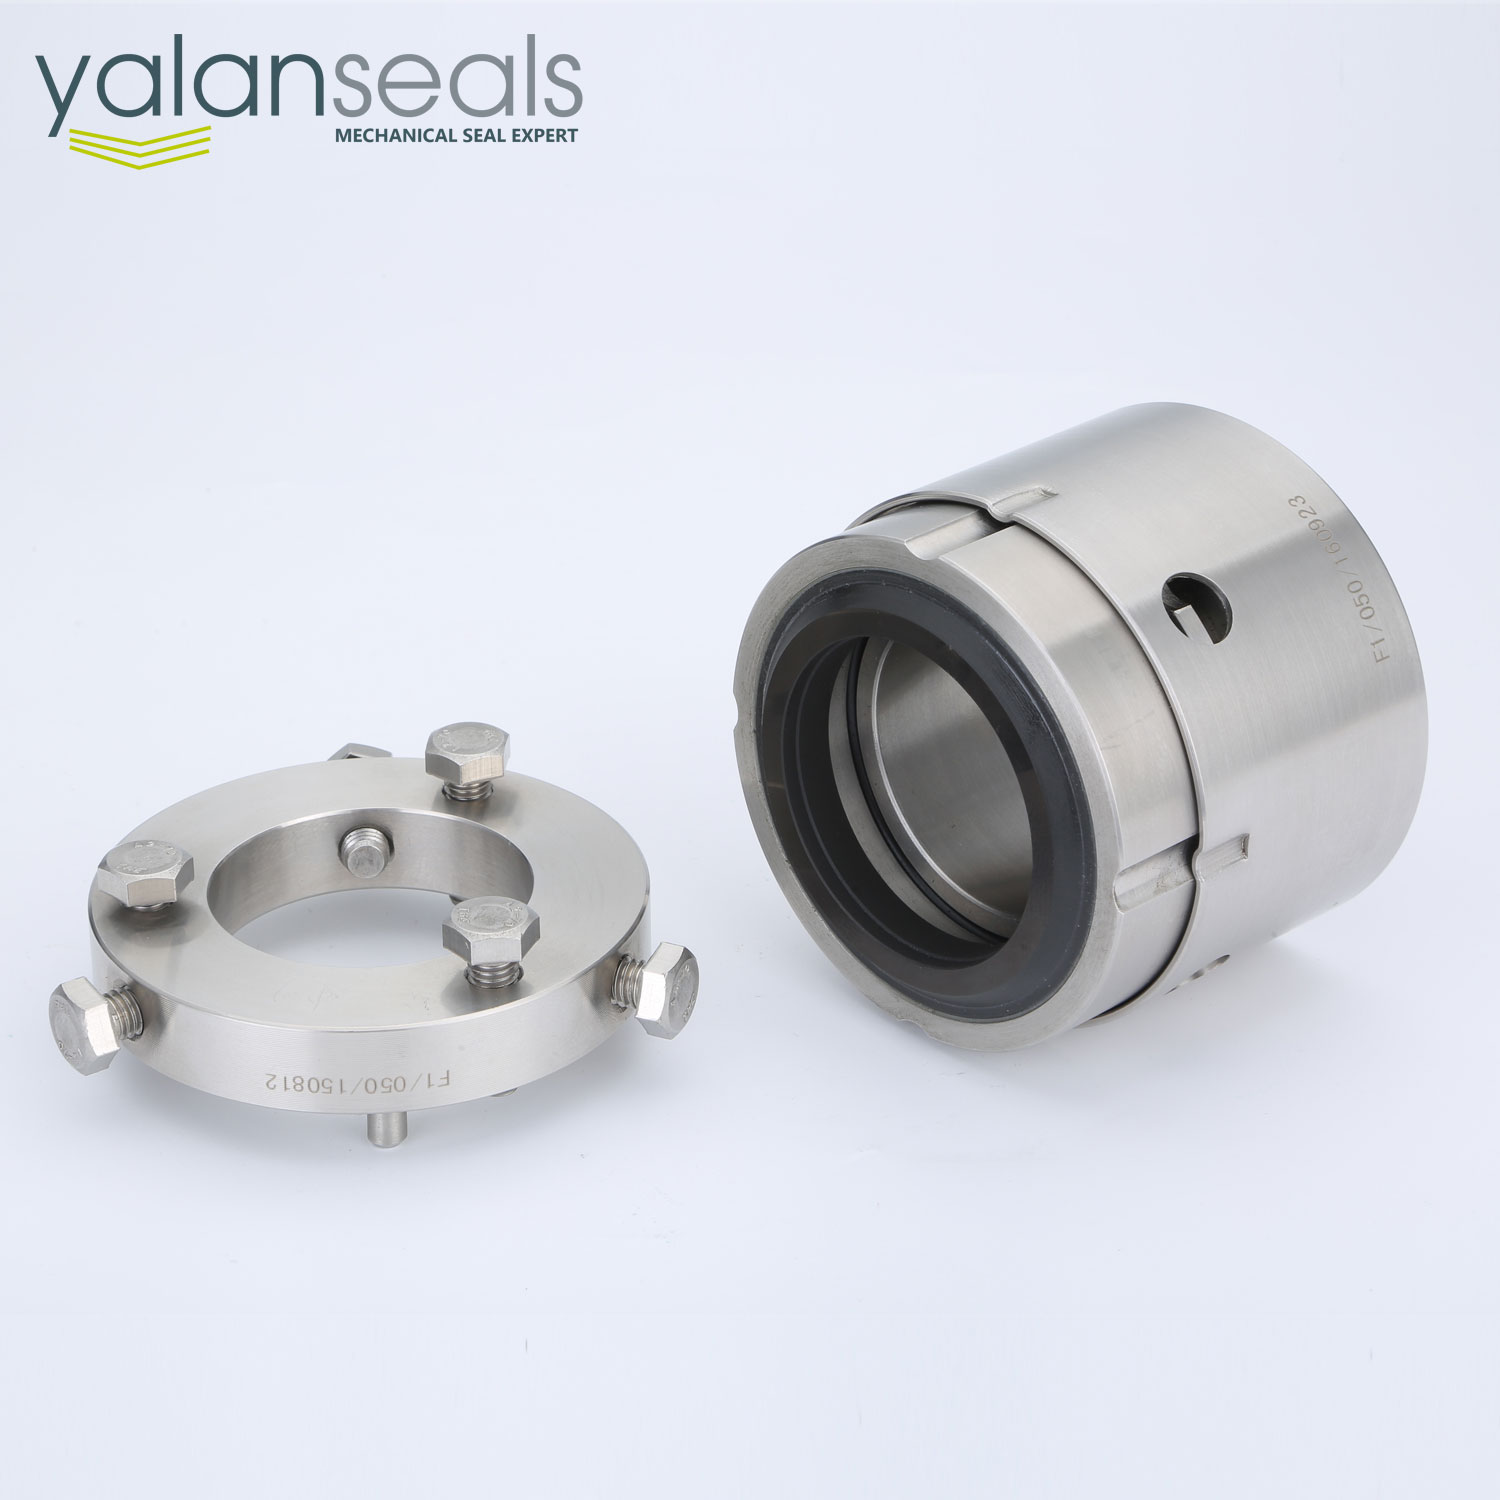 104 Mechanical Seal Carbon Face Rotary and Seat